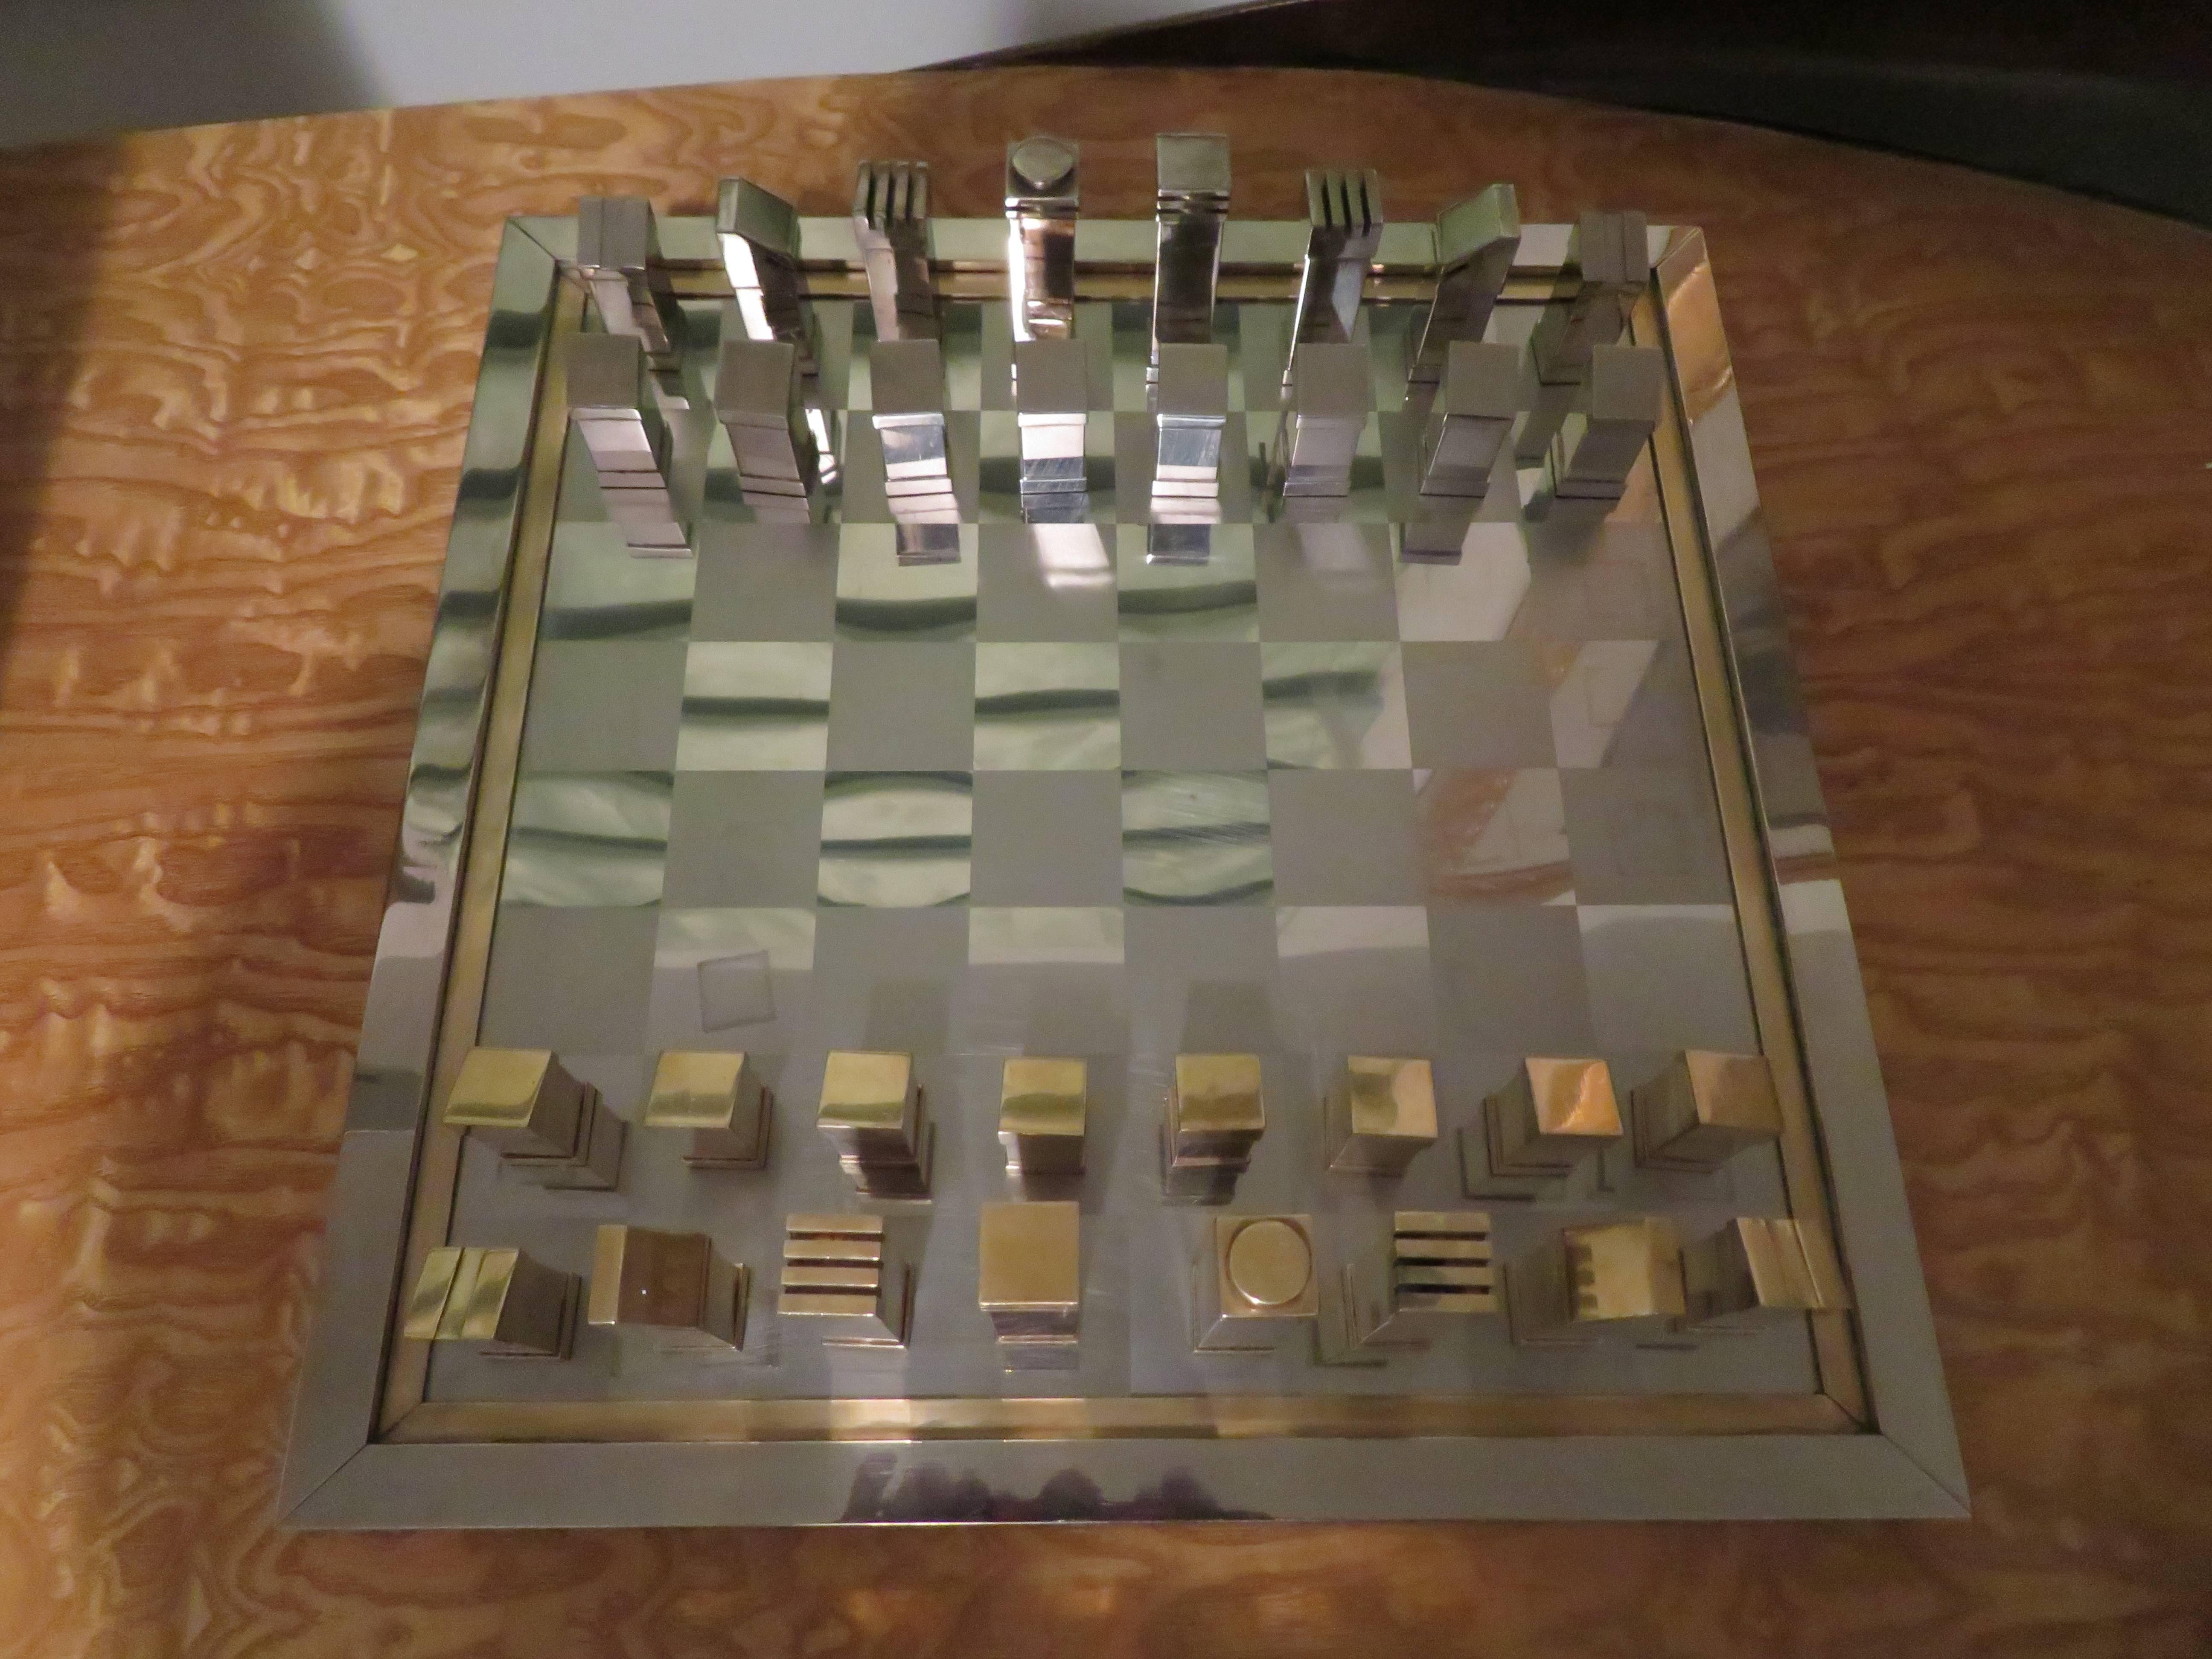 
A magnificent 1970s Italian chess set by Romeo Rega. Constructed of polish chrome and brass. The board is signed Romeo Rega made in Italy on the side.

Dimension: 
Board 16.75” wide 16.75” deep and .75 high.
Game pieces 3.5” high tallest 2”